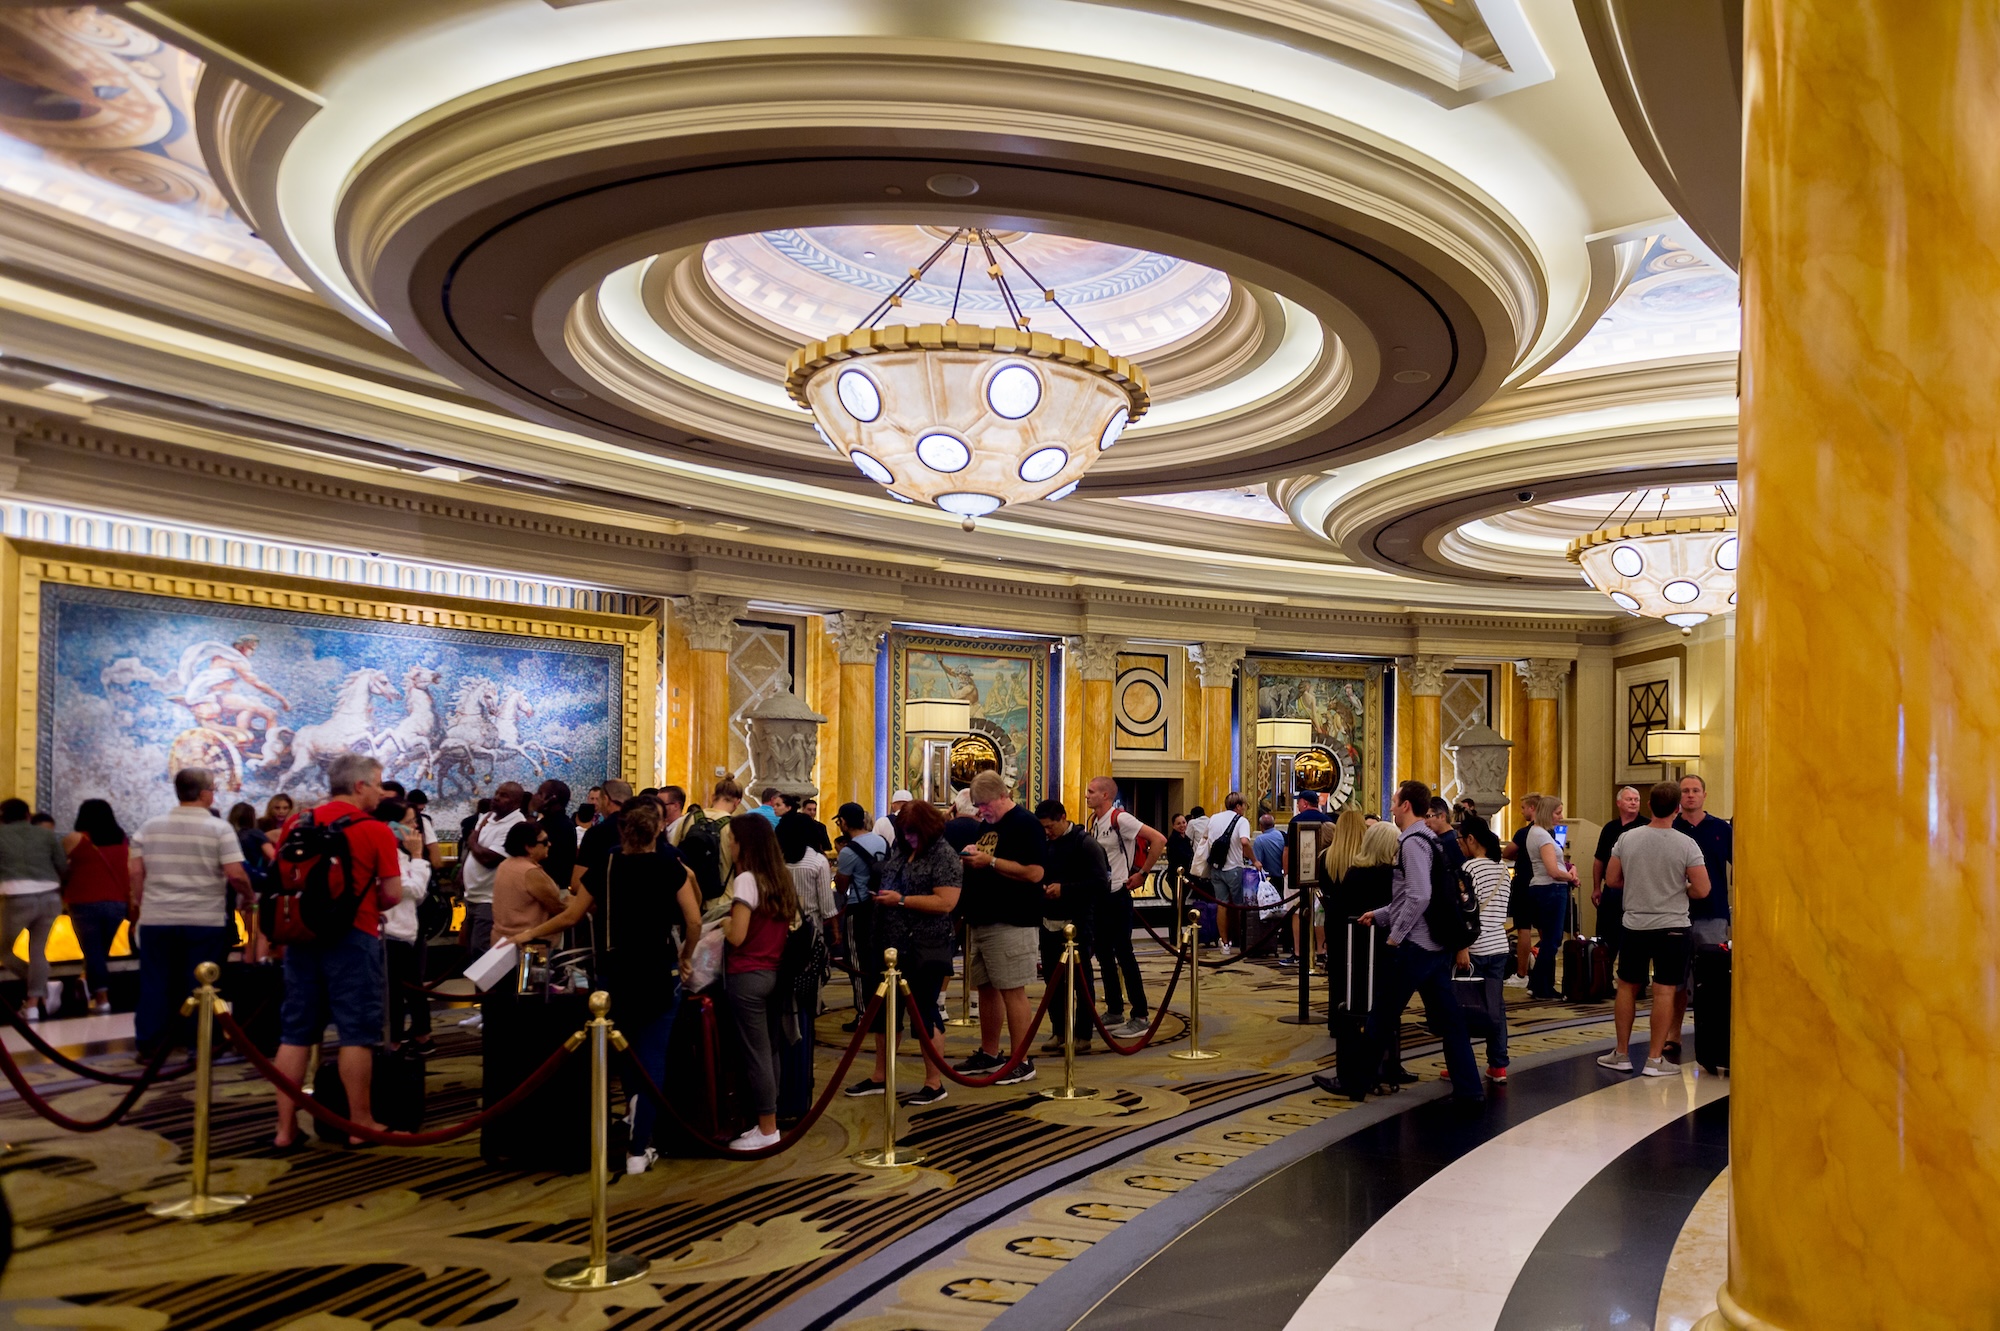 Build and they will come: the check-in hall at Caesars Palace, Las Vegas